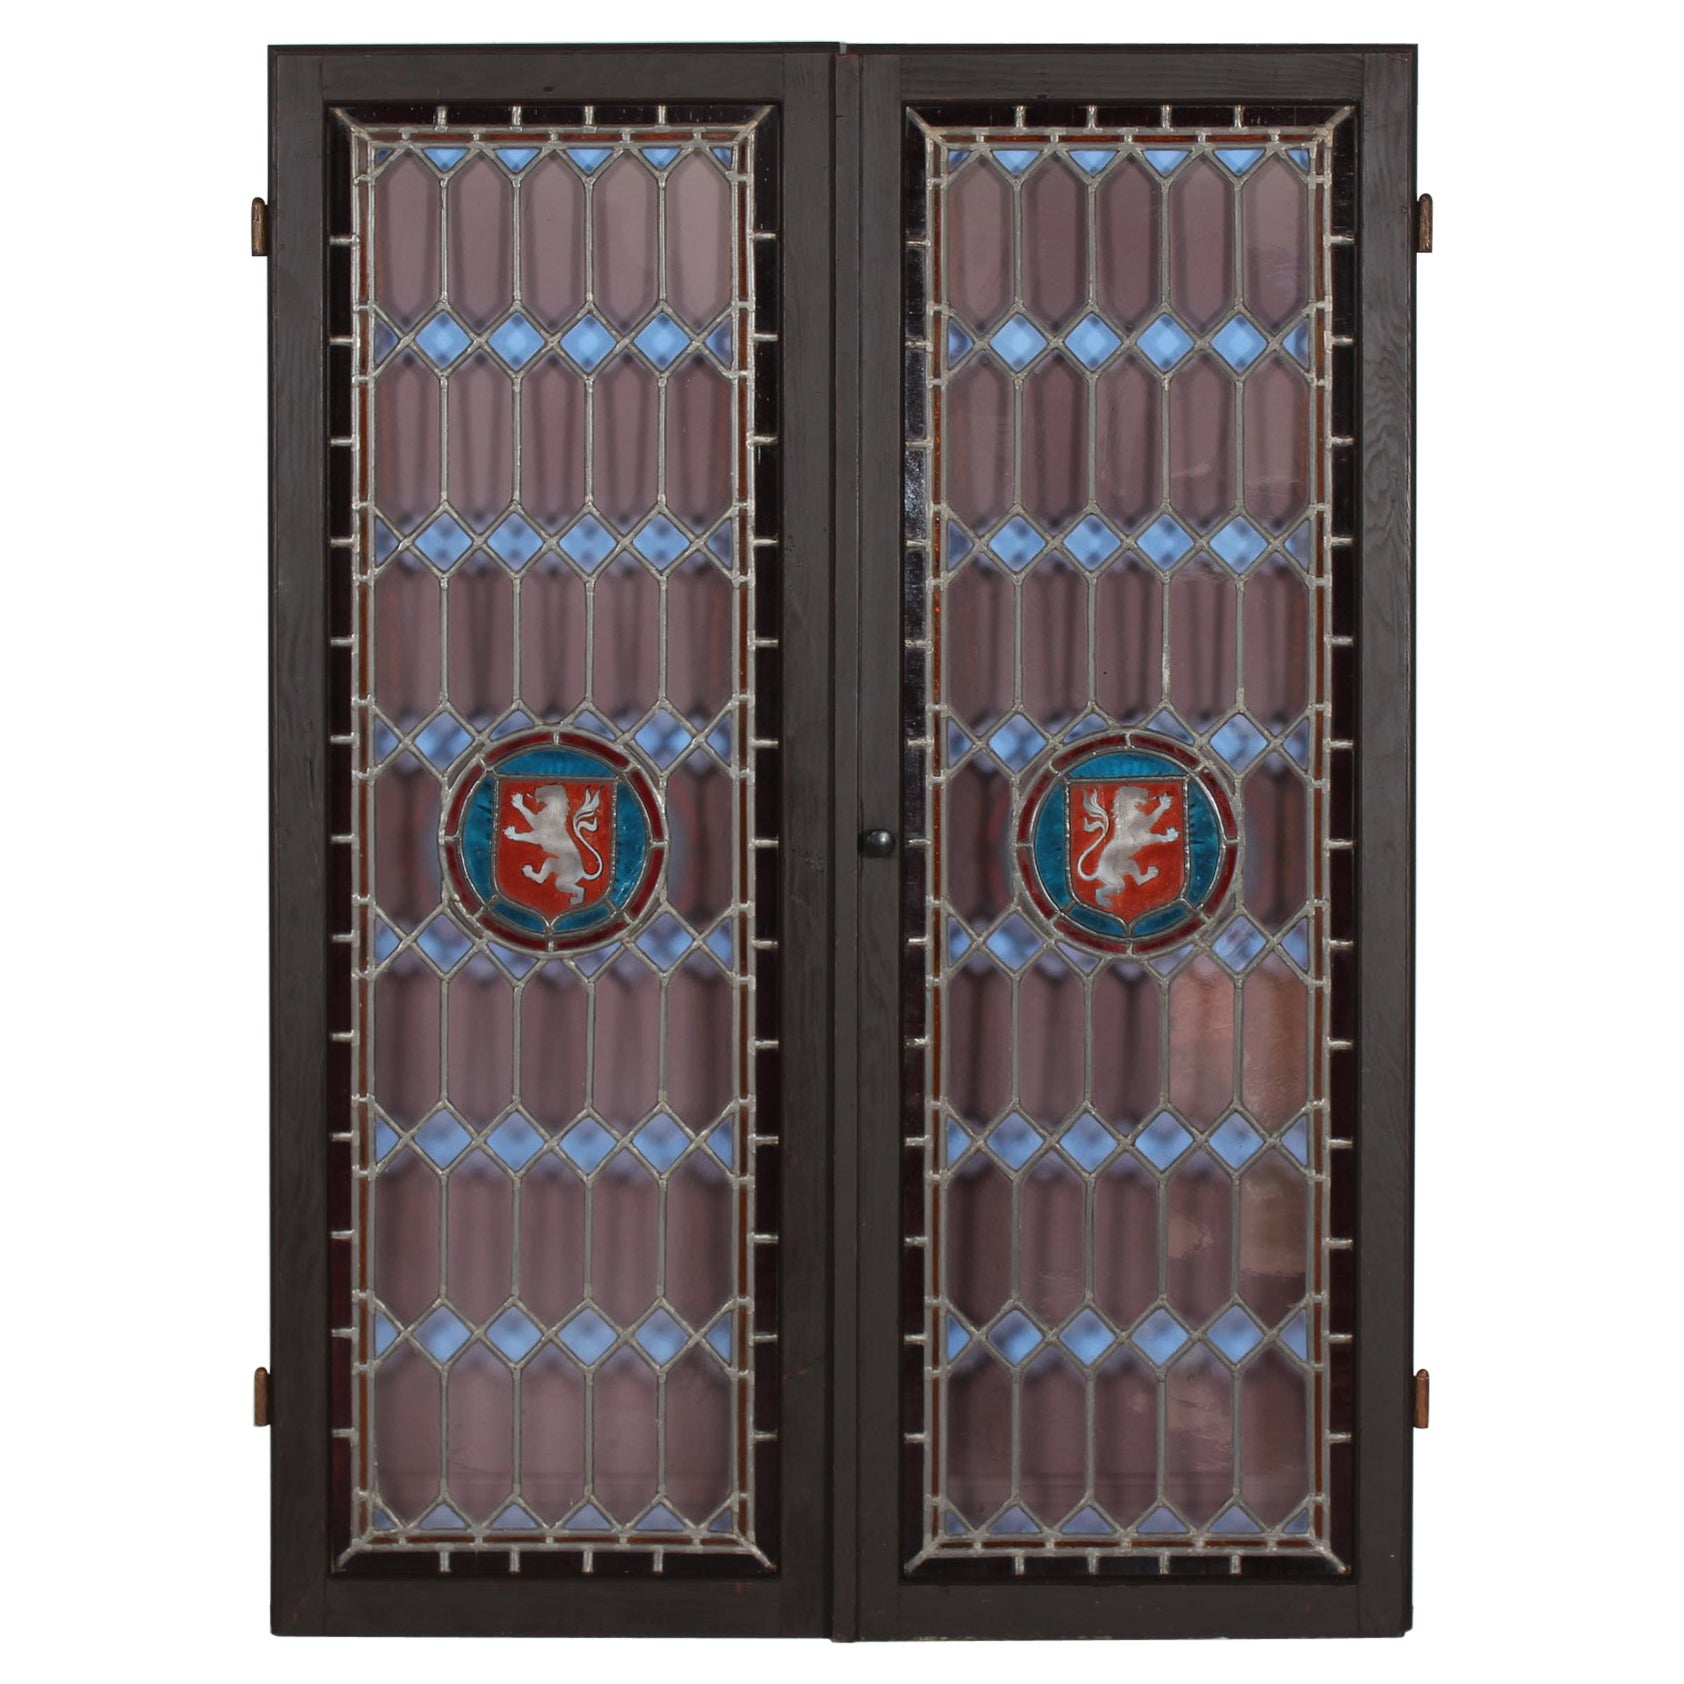 Set Old Leaded Windows with Colored Panes in Frame of Dark Wood, Denmark 1940s For Sale